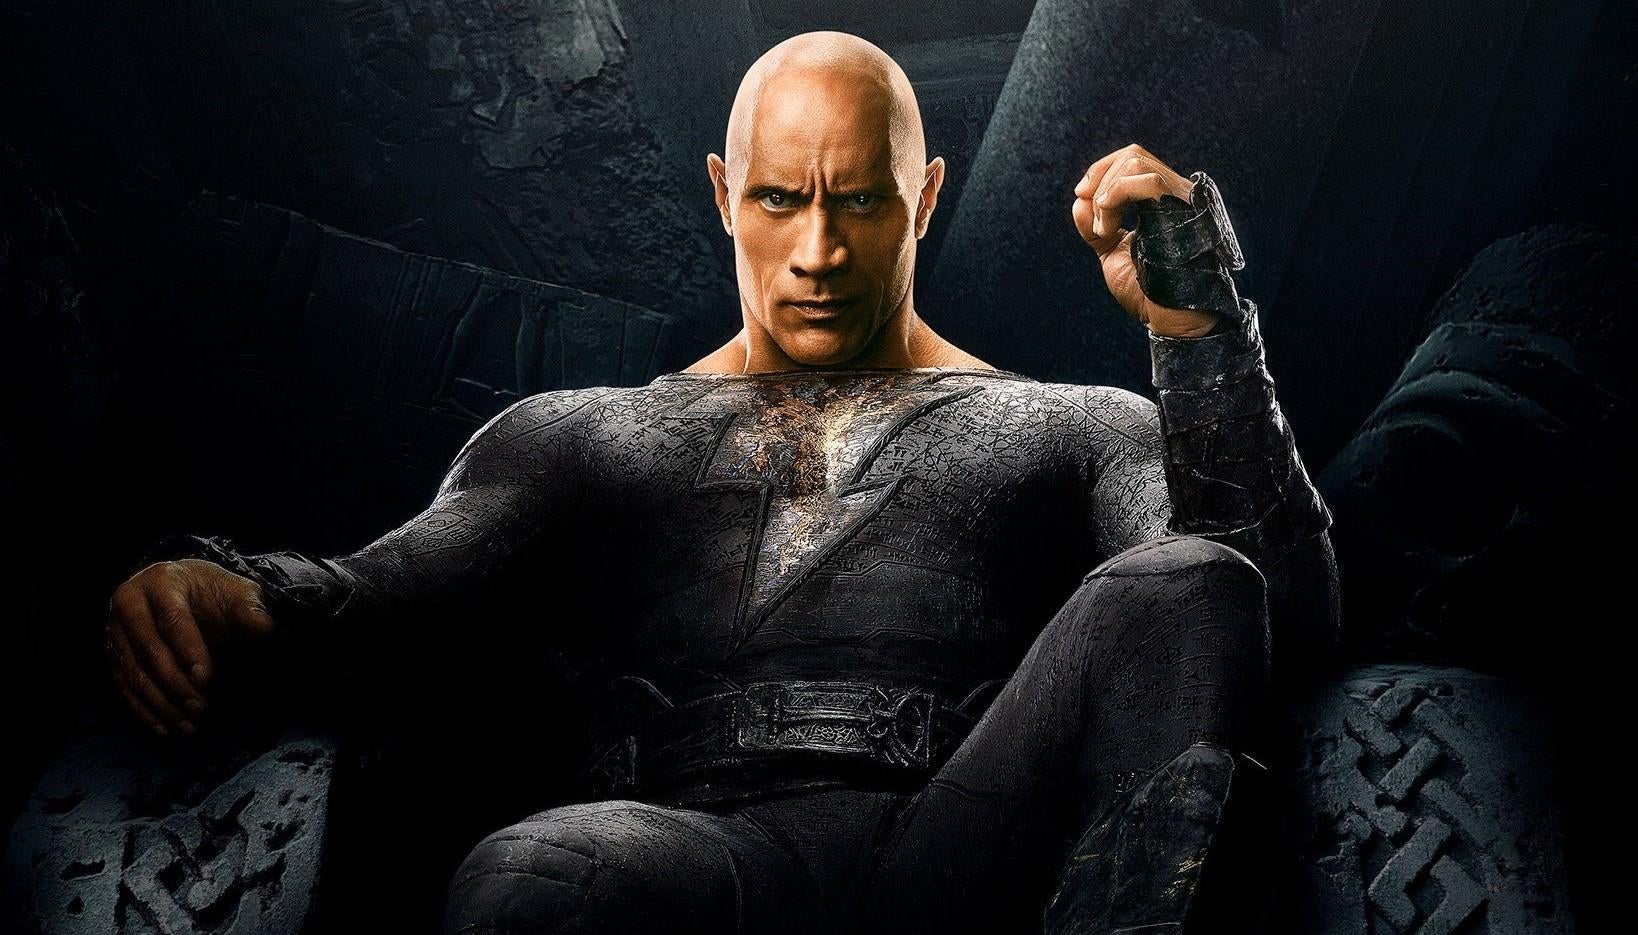 Black Adam on Track to Become Dwayne Johnson's Biggest Box Office Opening Ever